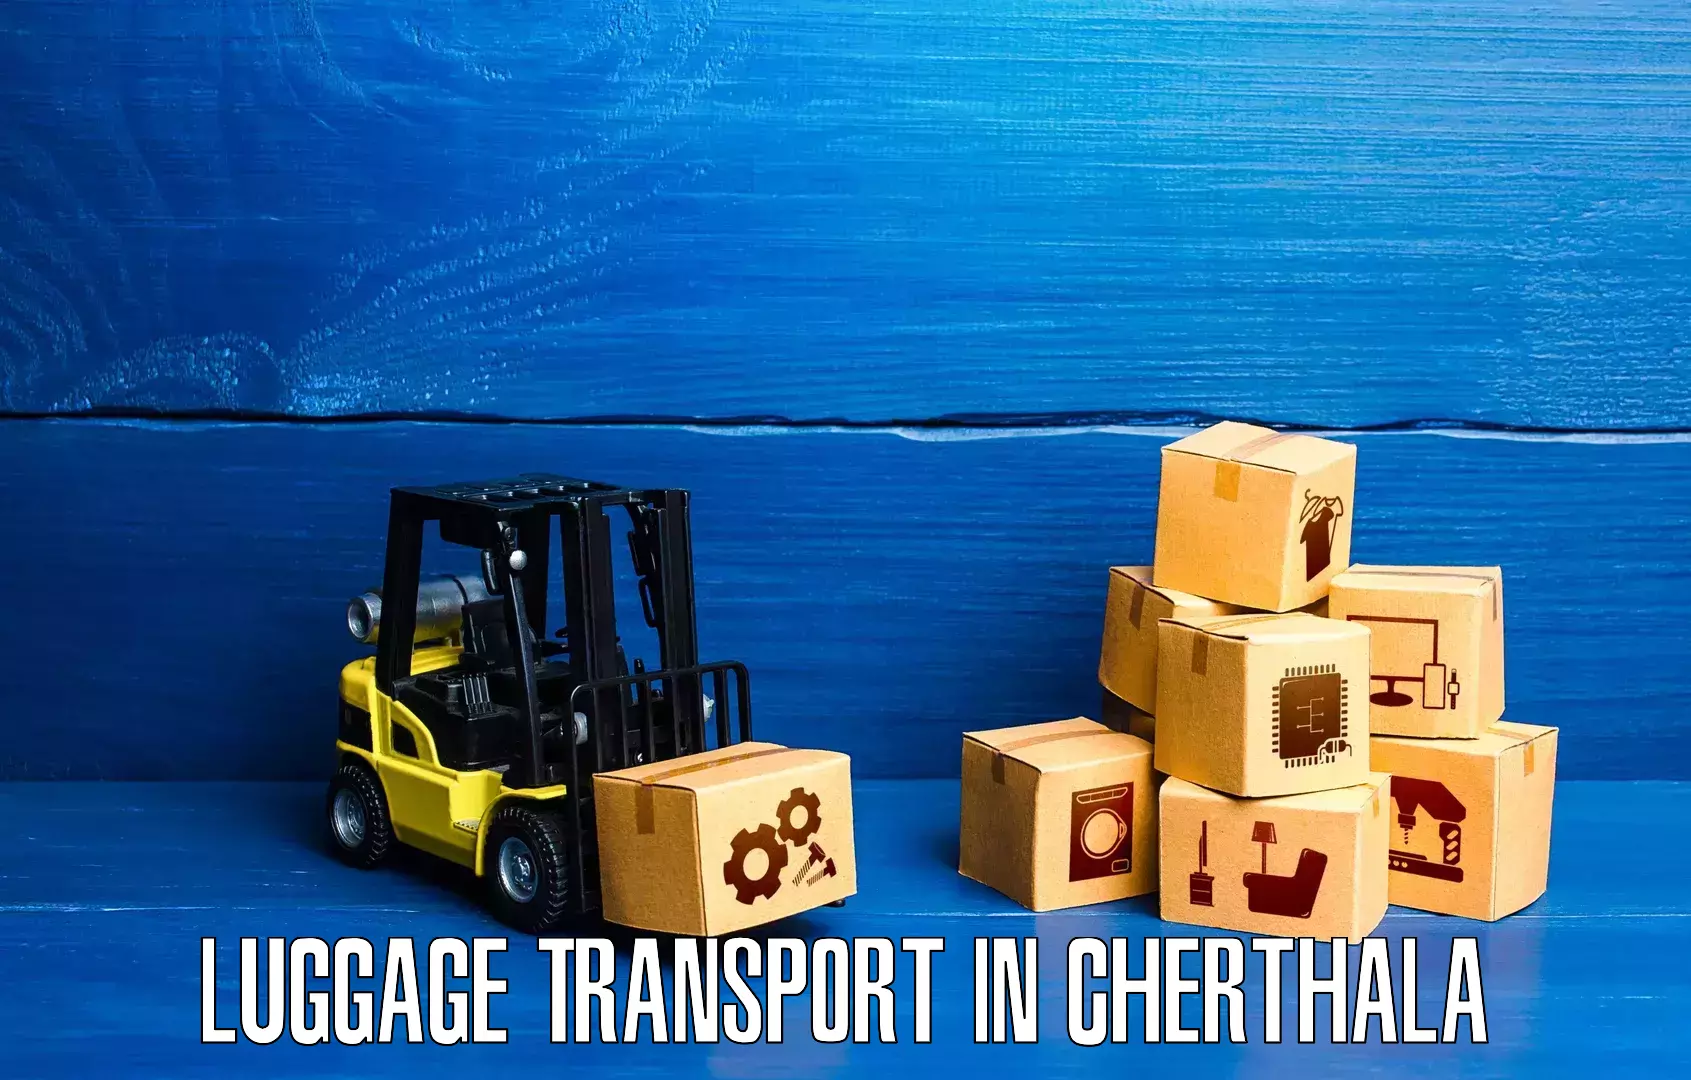 Luggage transport consulting in Cherthala